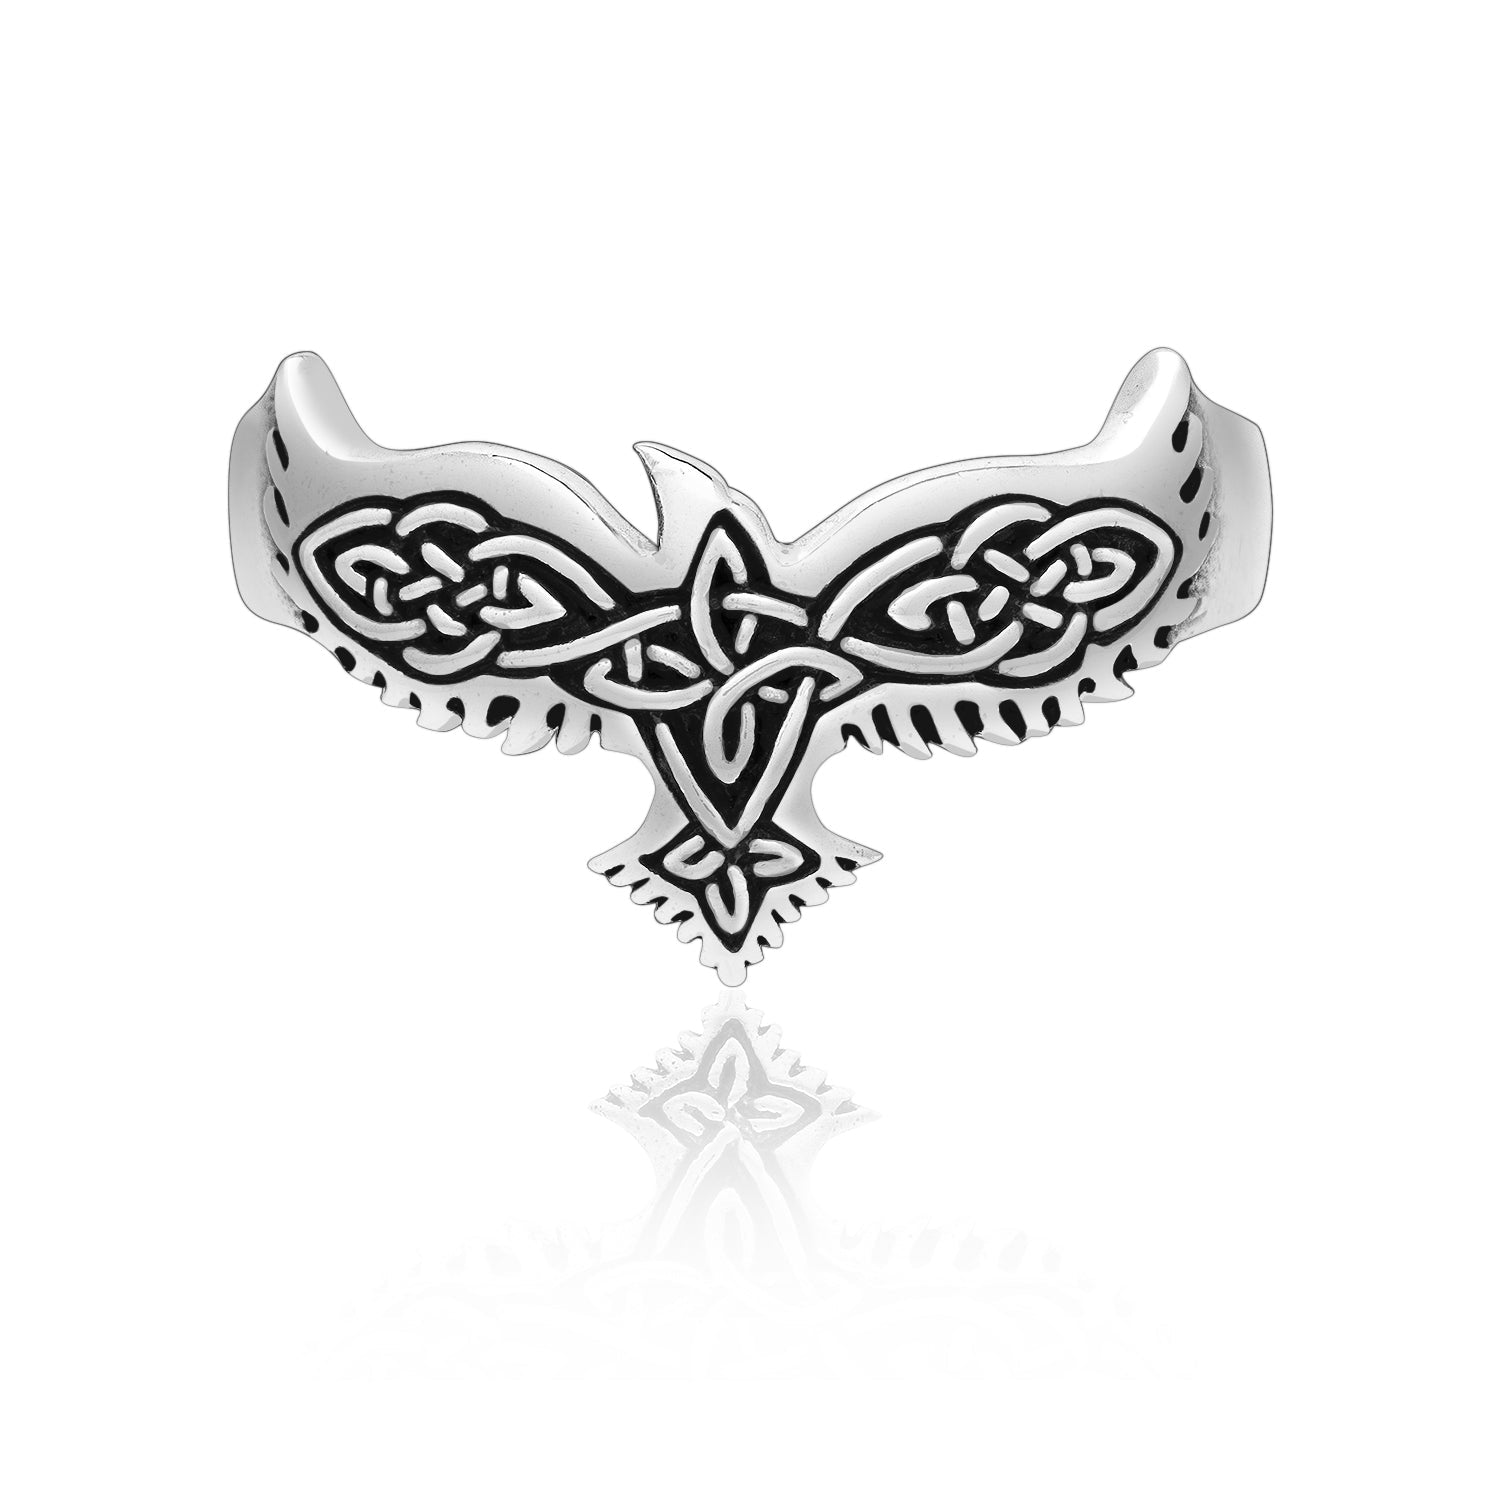 925 Sterling Silver Viking Raven Ring with Celtic Knotwork - SilverMania925